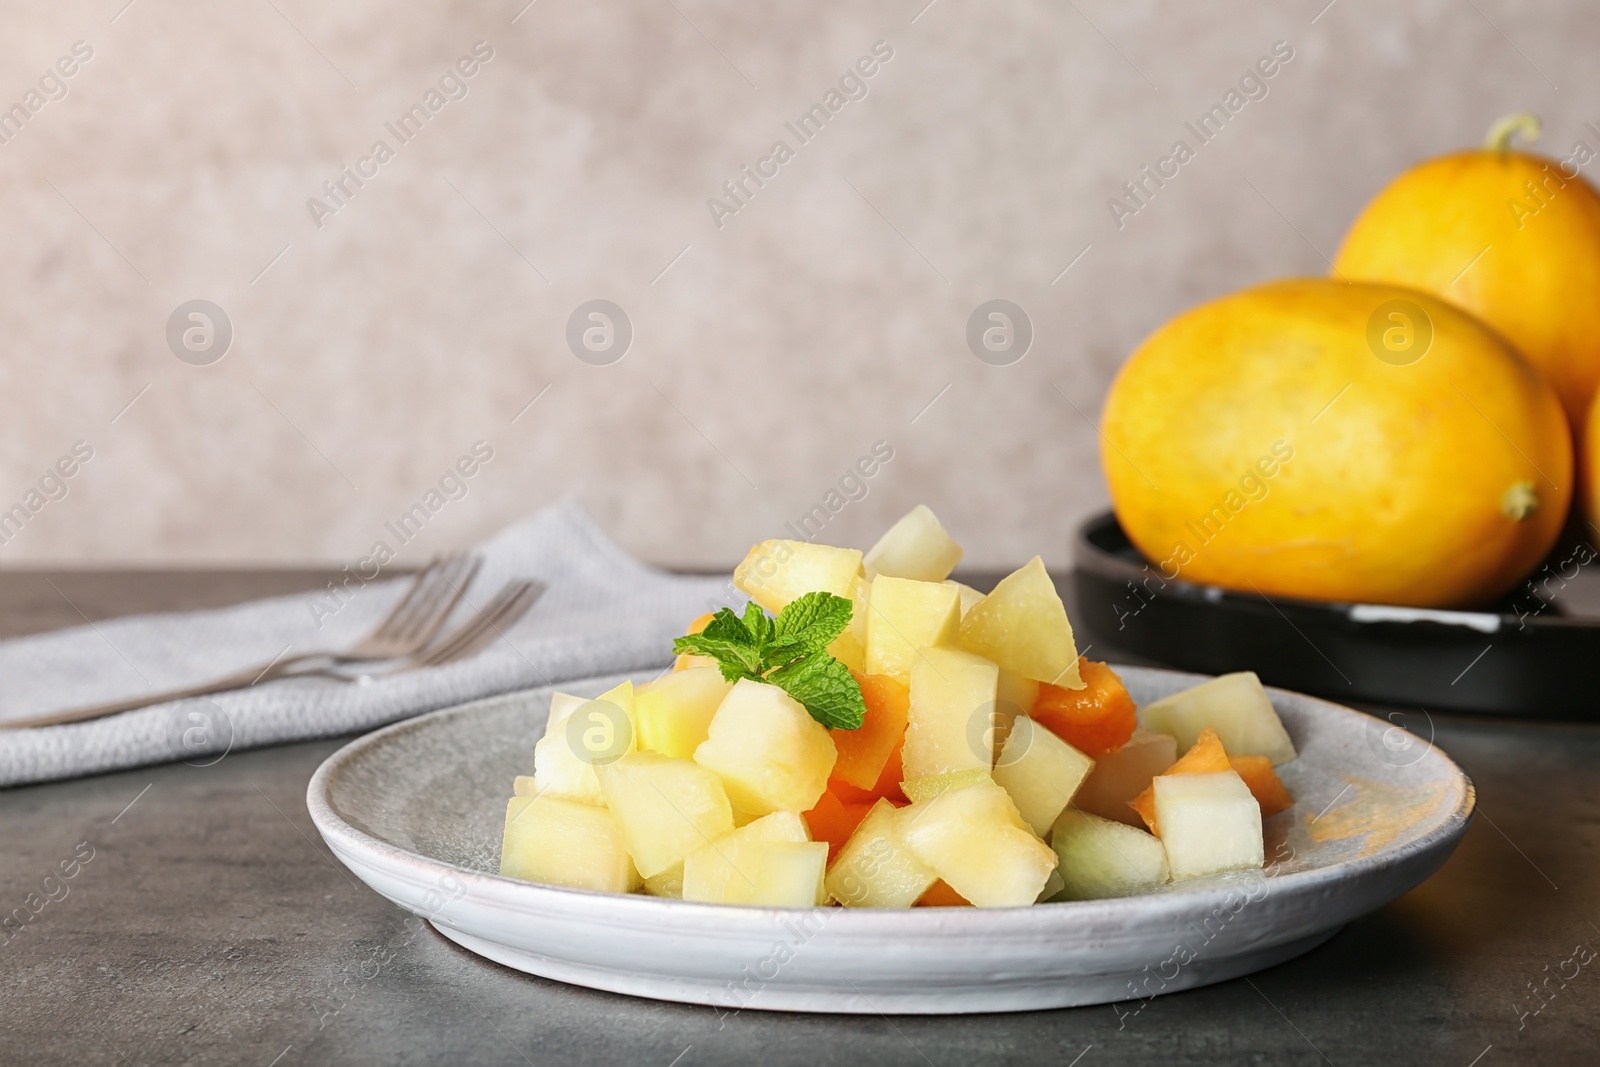 Photo of Plate of salad with assorted melons on table